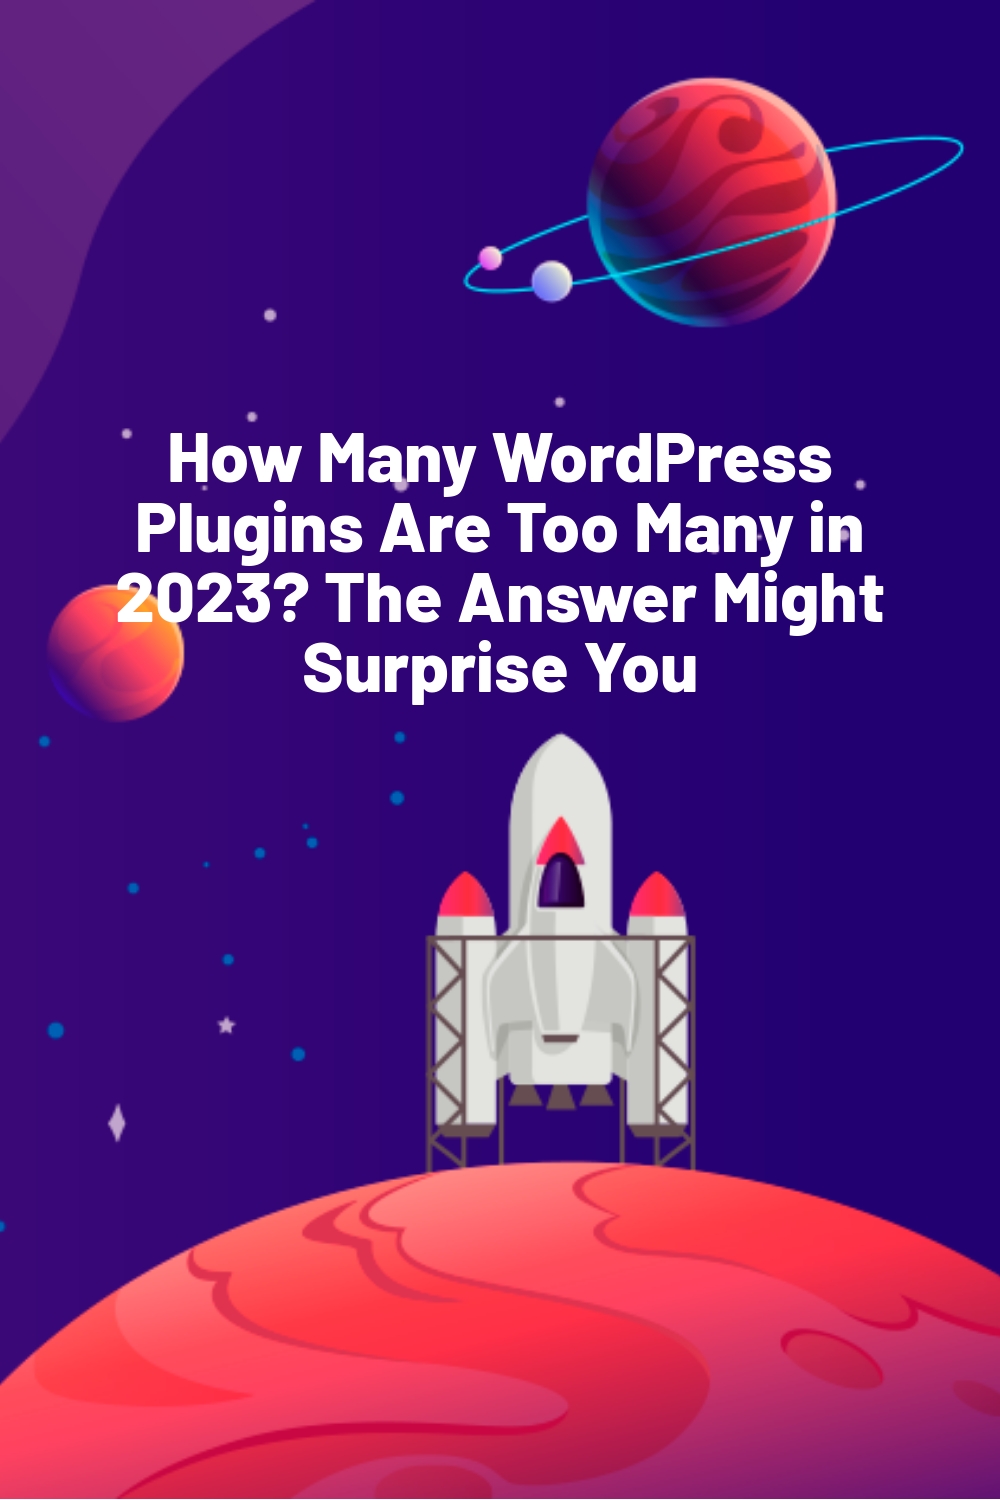 How Many WordPress Plugins Are Too Many in 2023? The Answer Might Surprise You